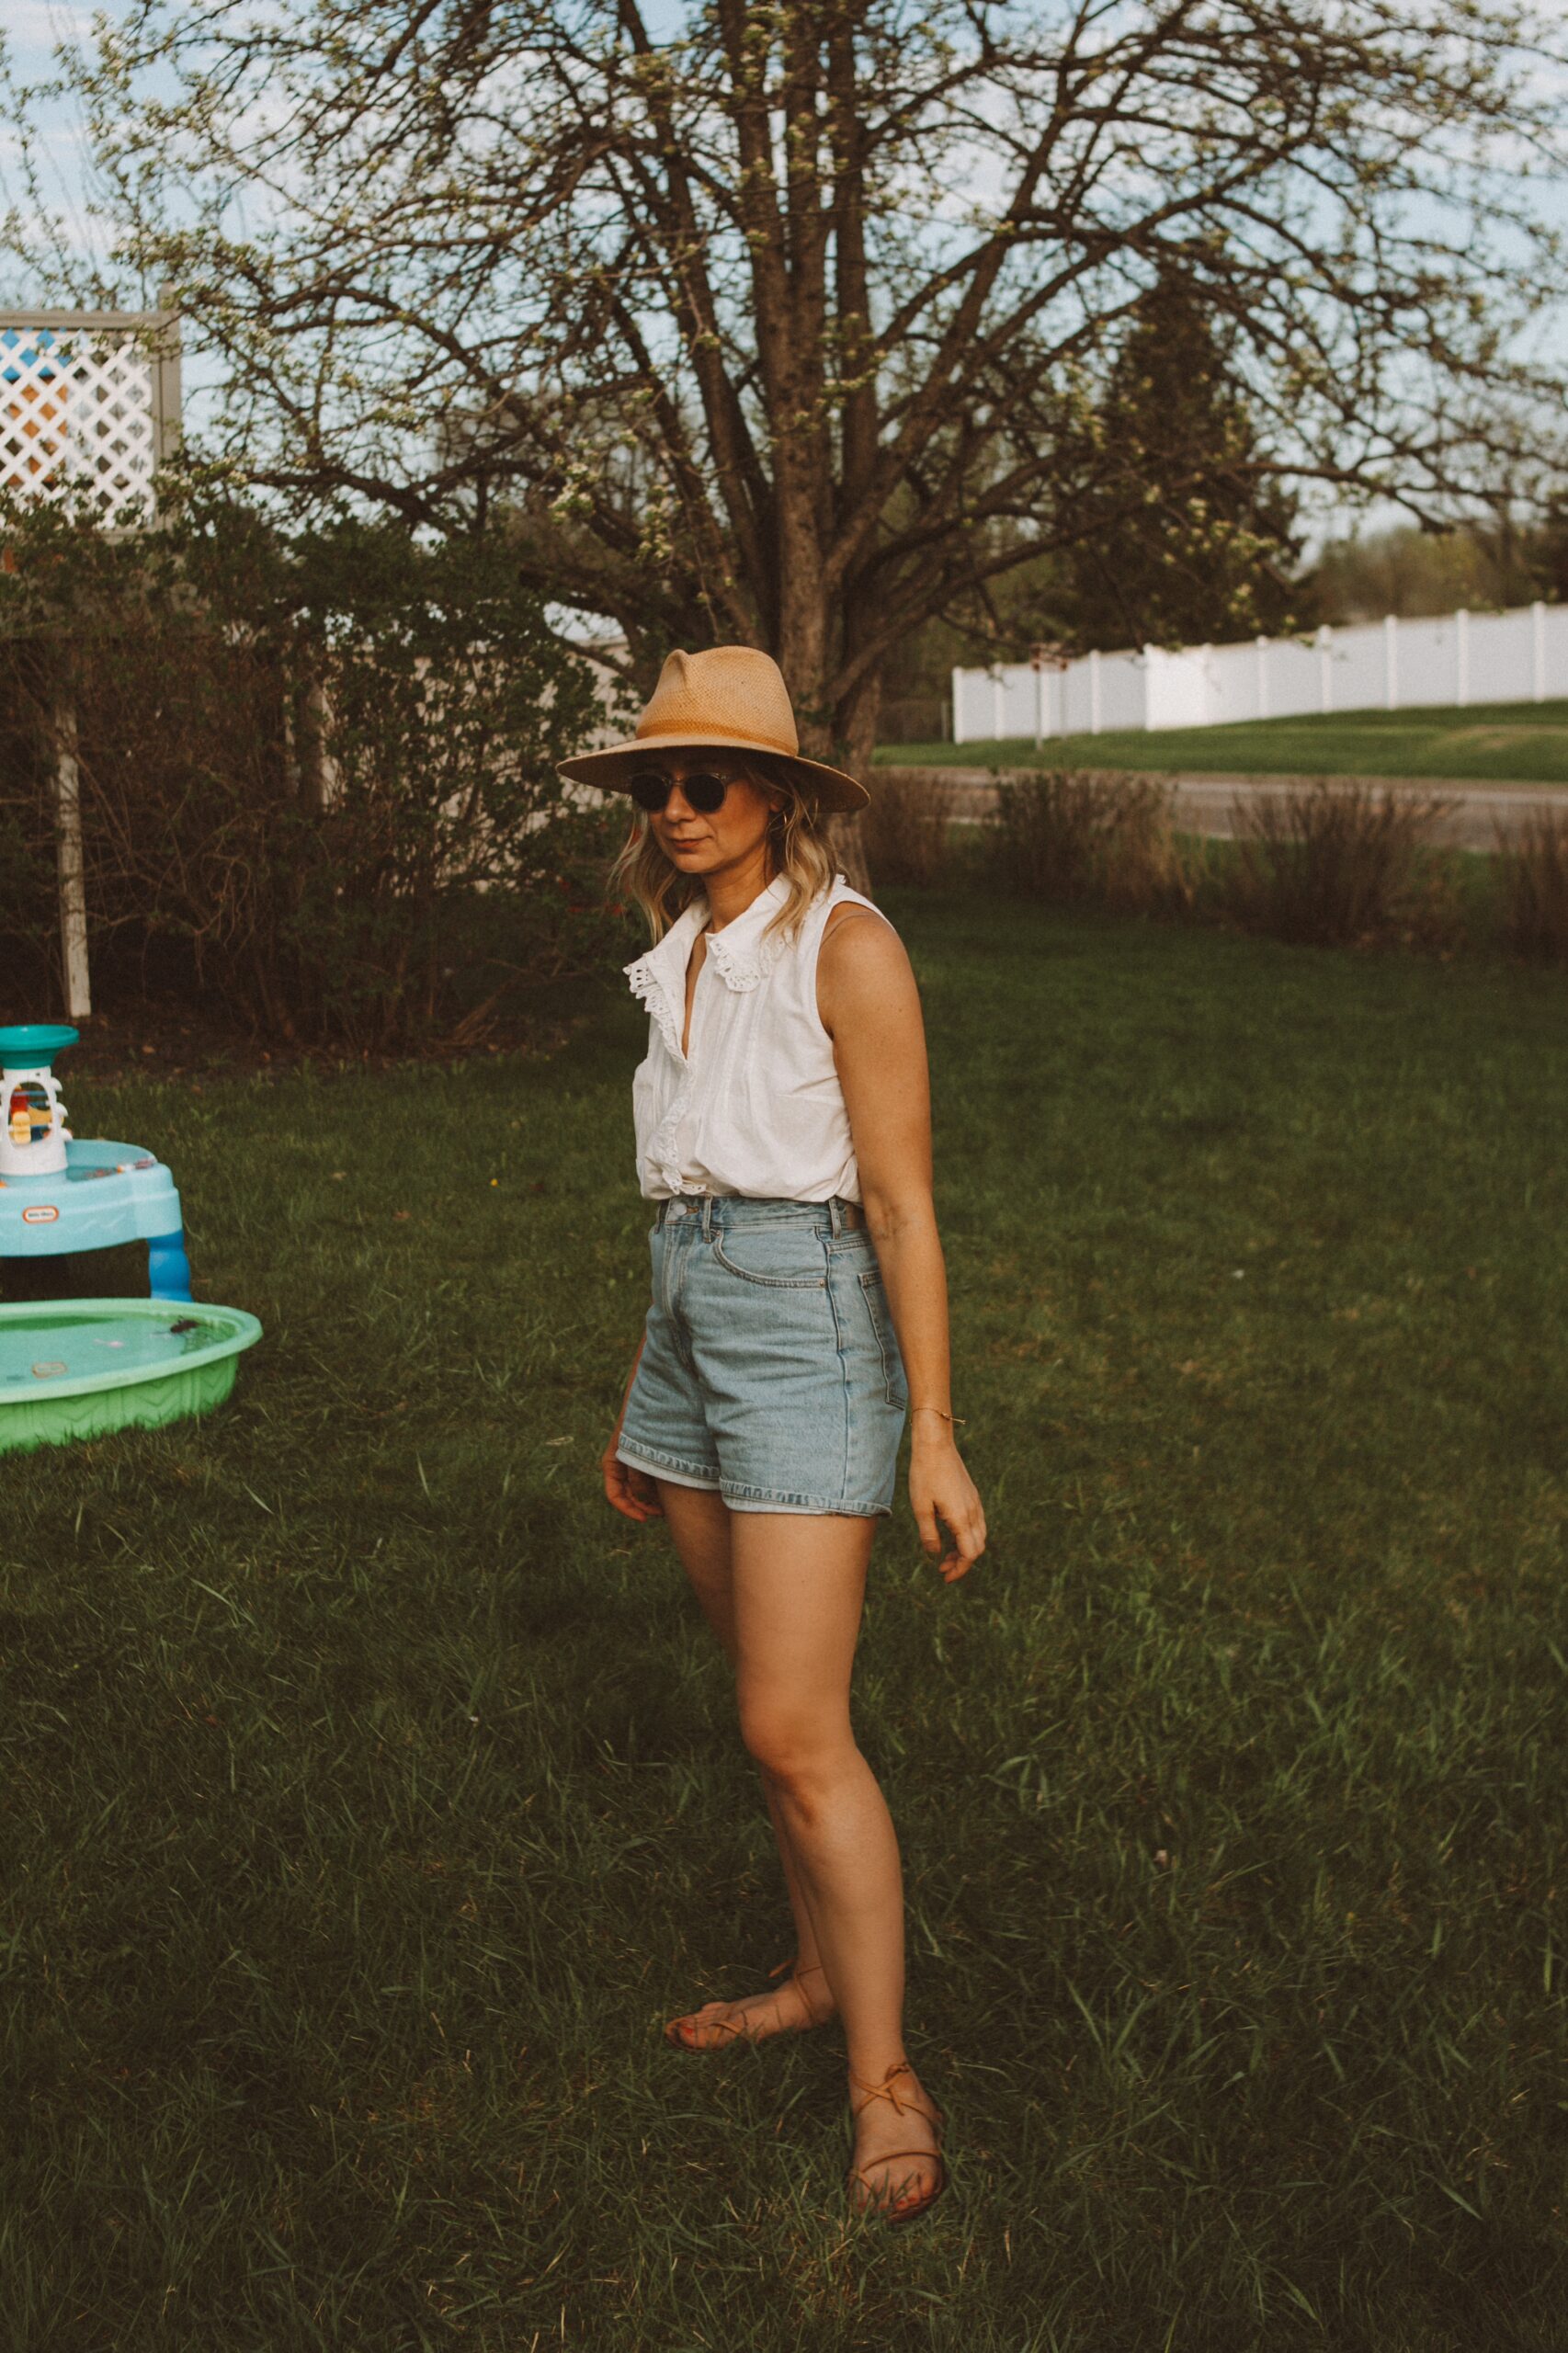 Karin Emily wears white tops from Sezane with a pair of Everlane denim shorts, a janessa leone hat, and minimal sandals